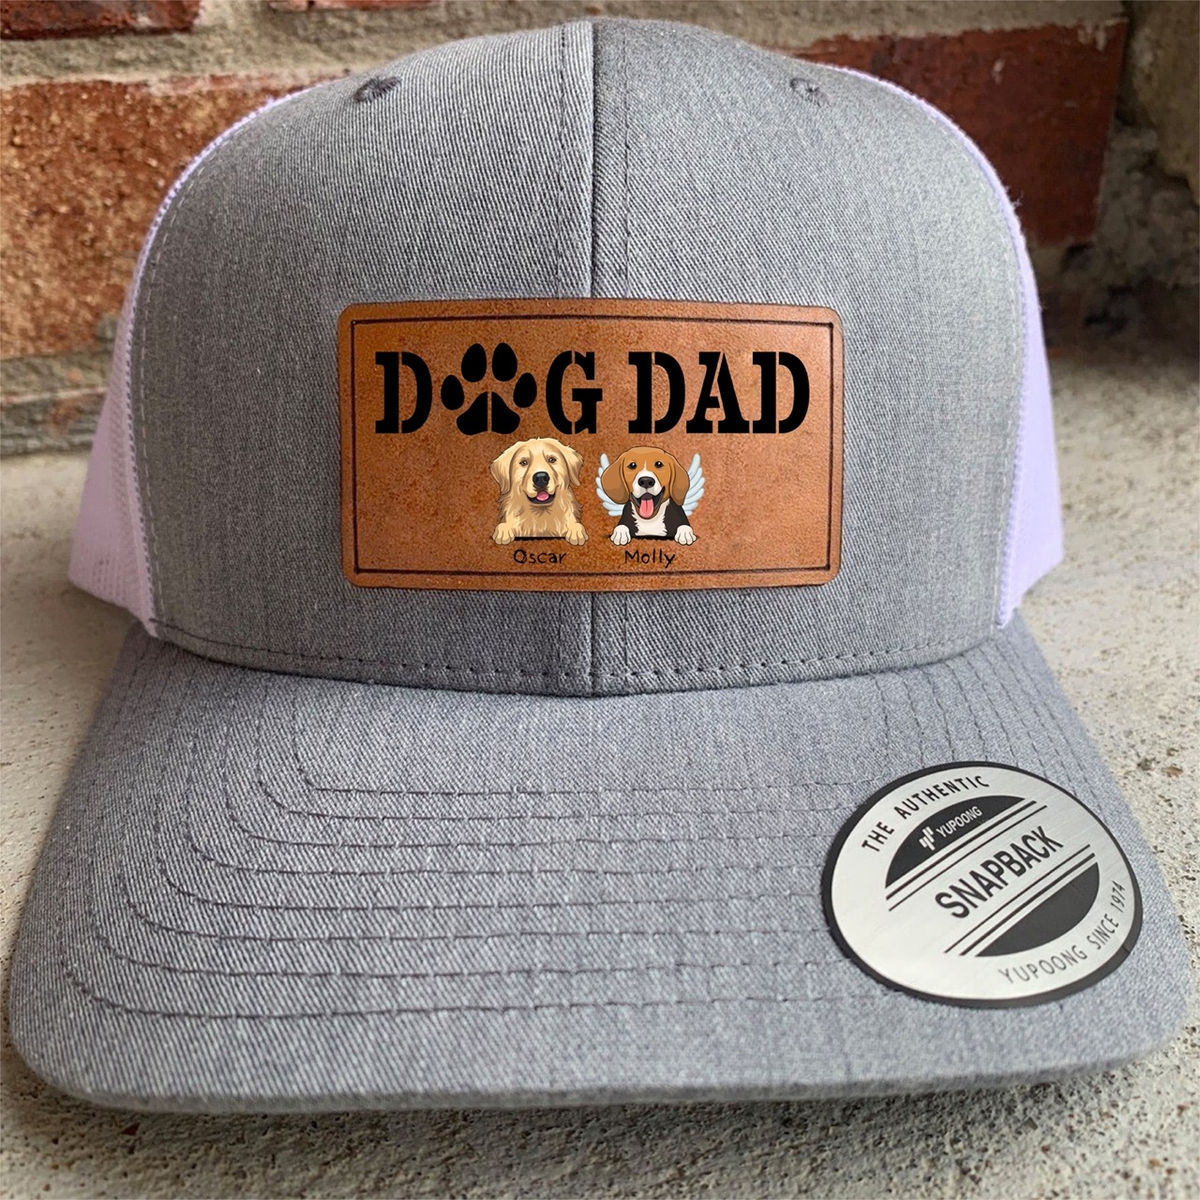 DOG DAD - Personalized Cap